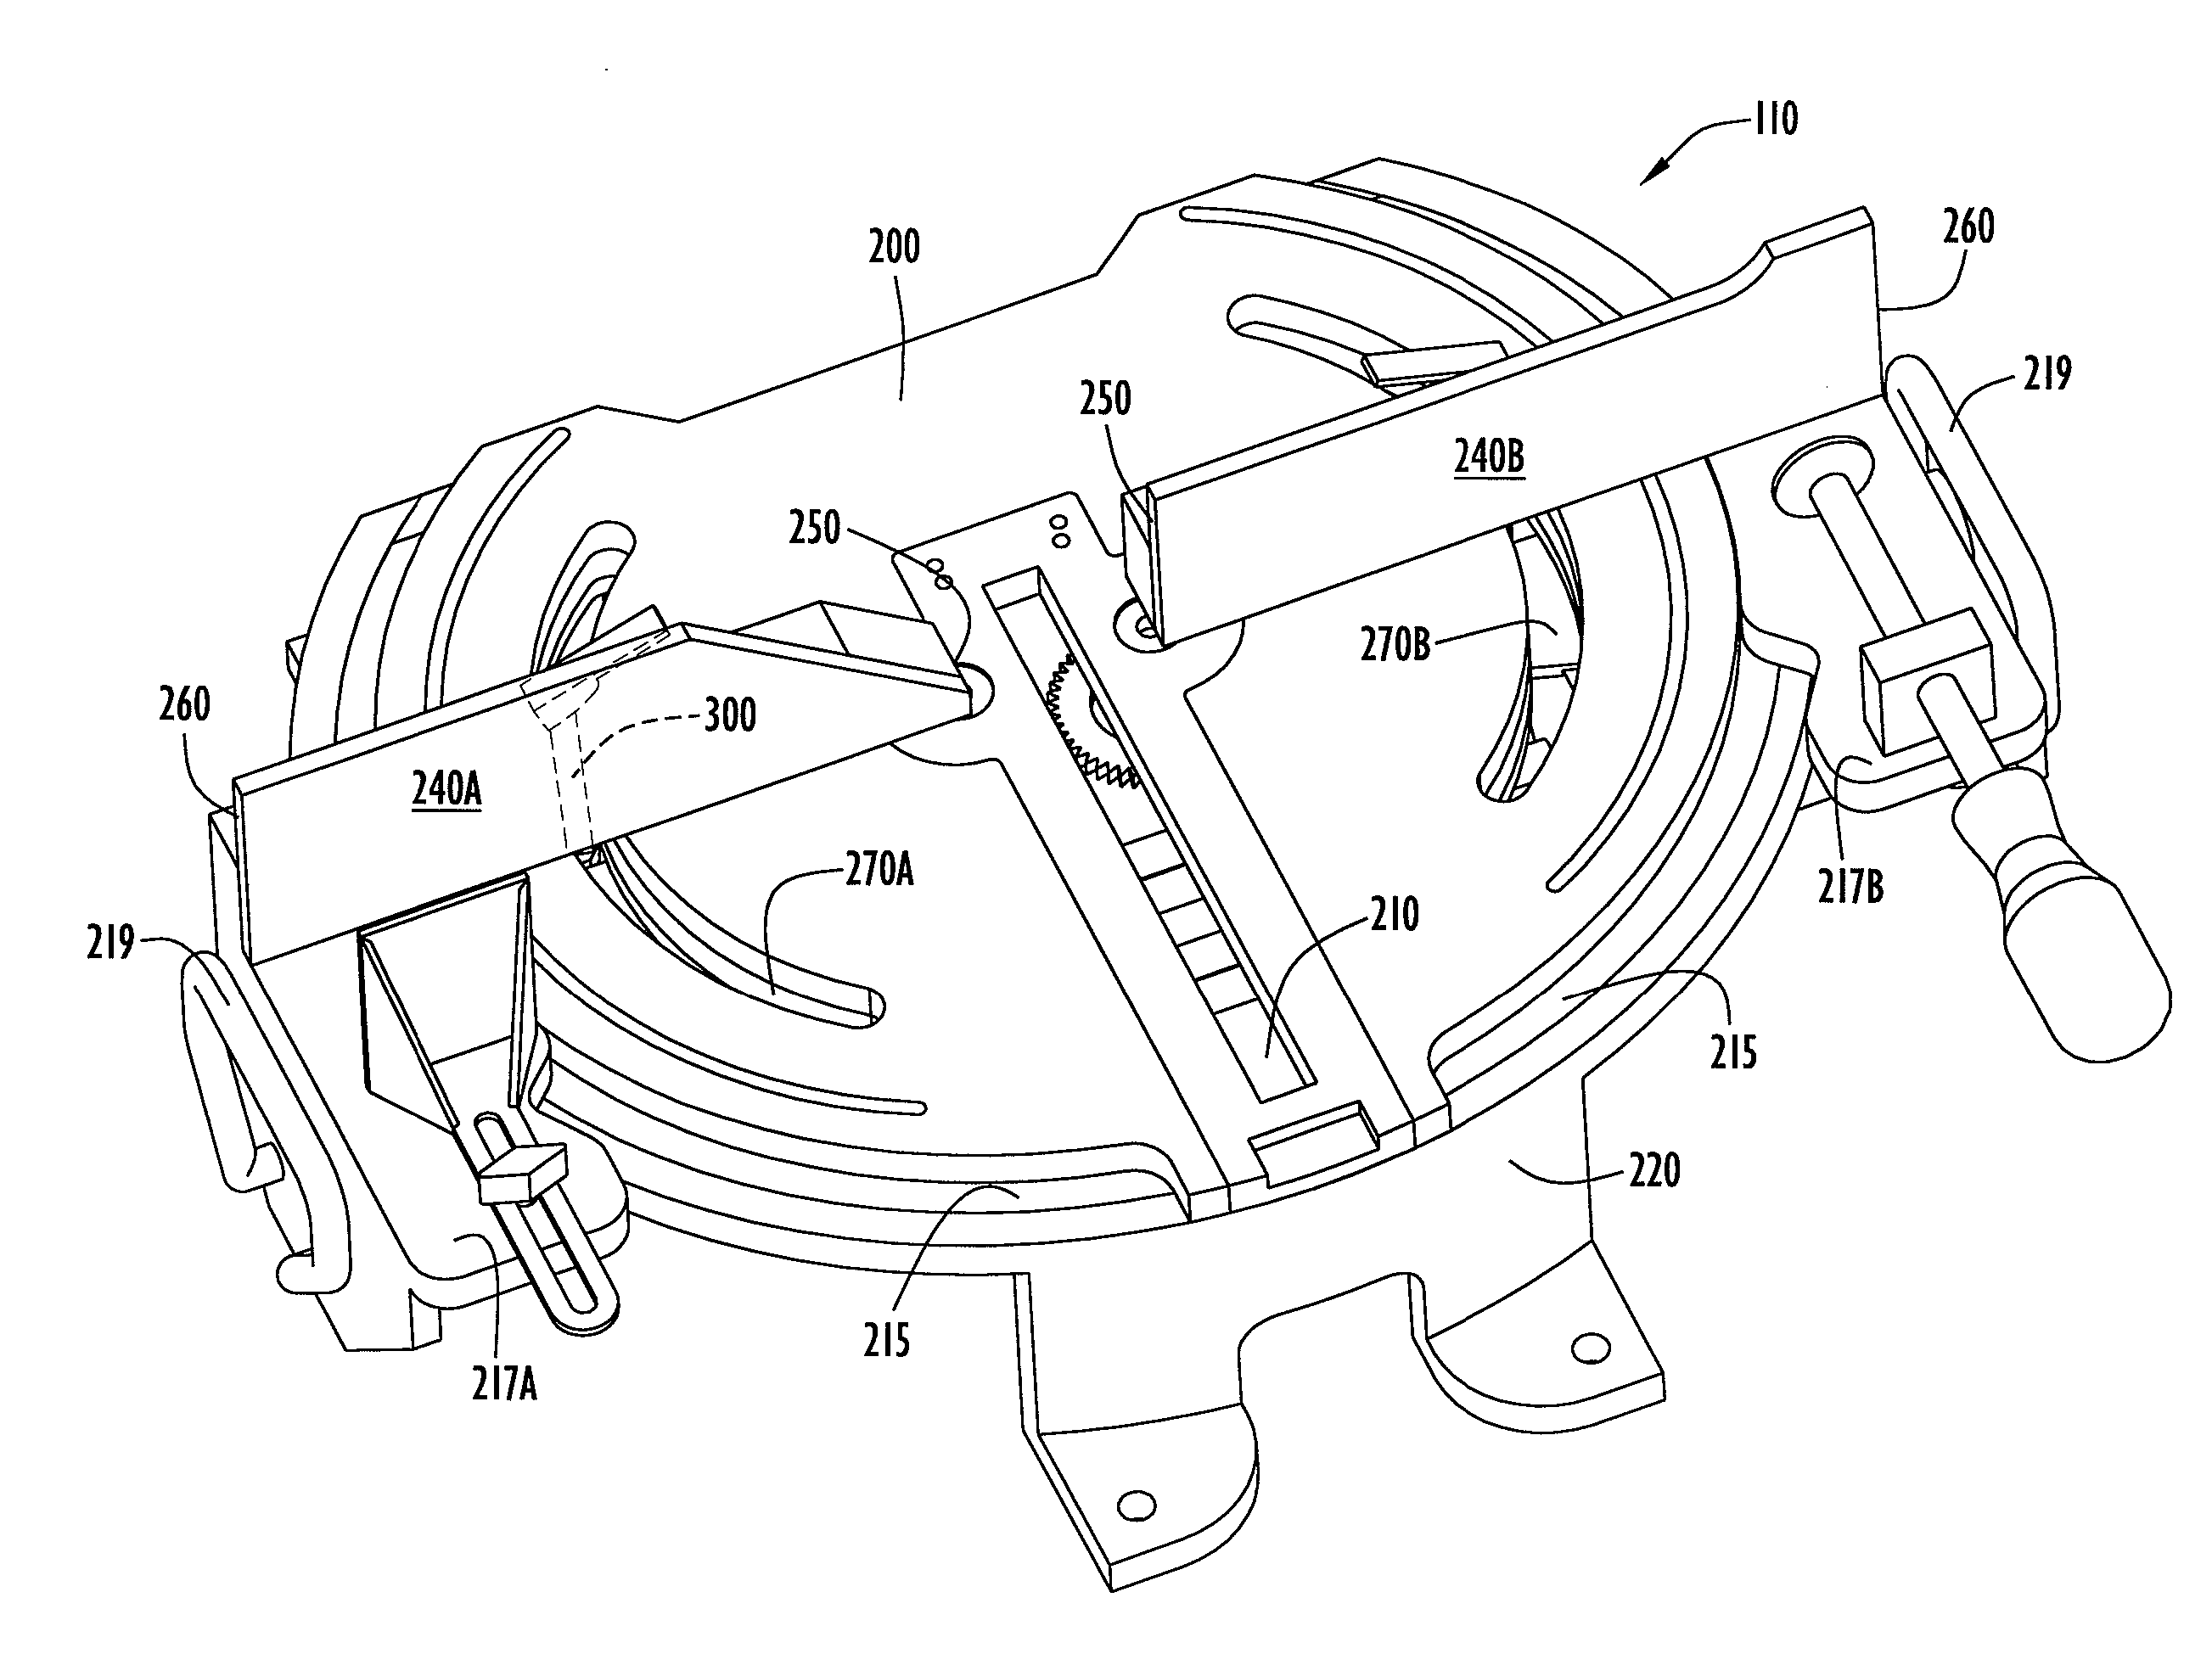 System for Forming a Miter Joint